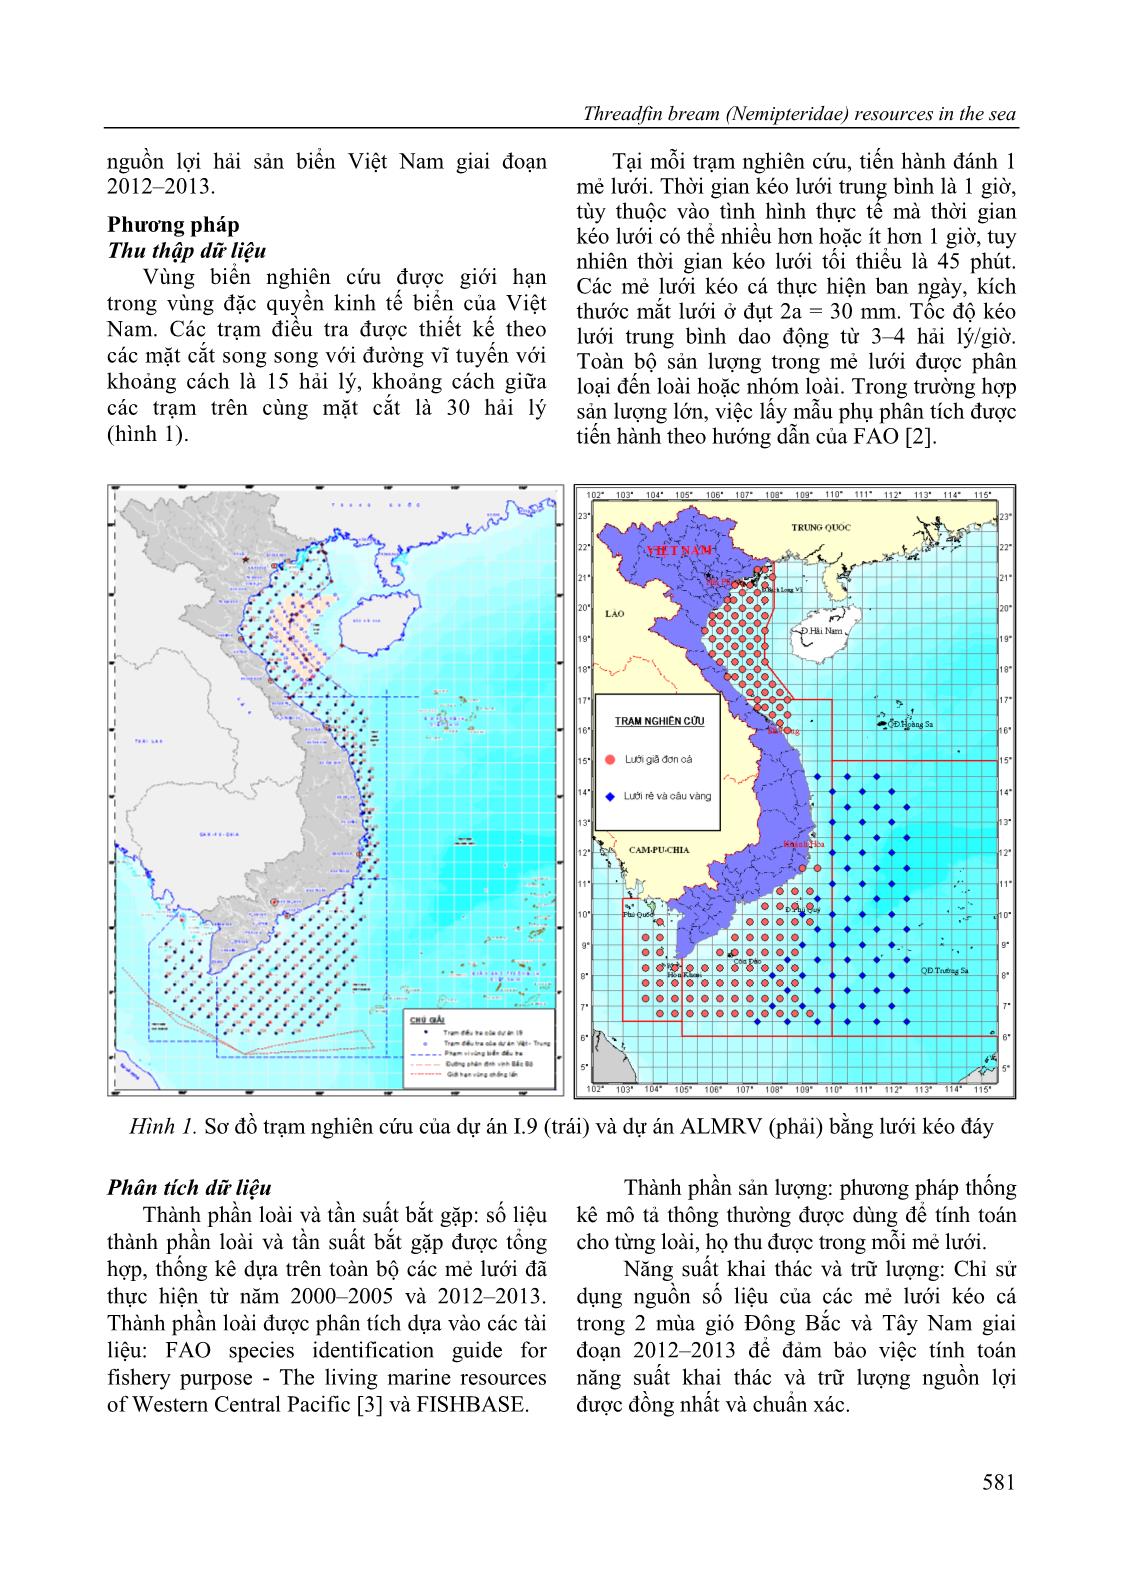 Threadfin bream (Nemipteridae) resources in the sea of Vietnam based on the bottom trawl surveys trang 3